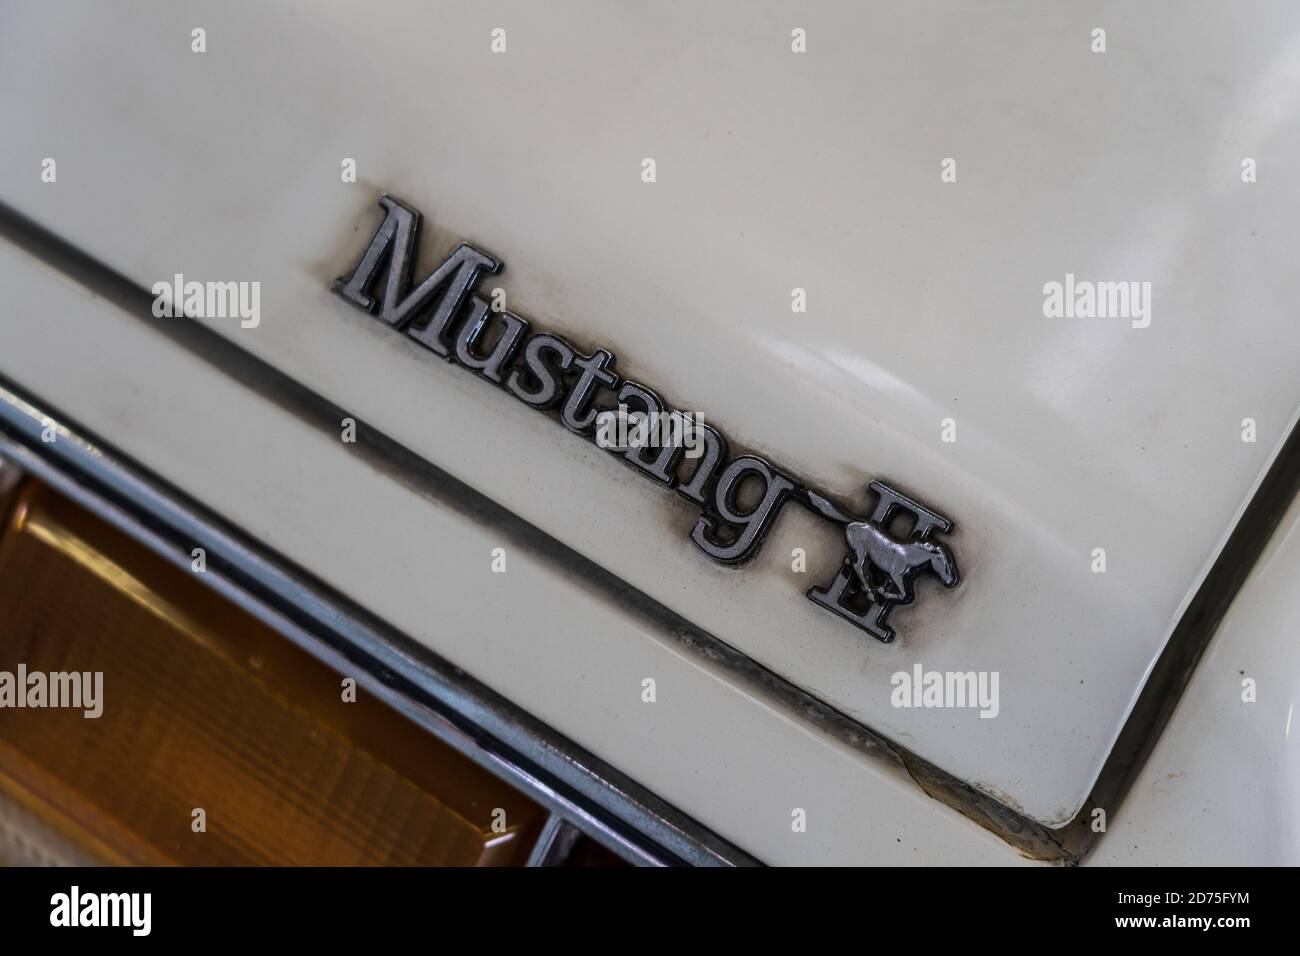 PAAREN IM GLIEN, GERMANY - OCTOBER 03, 2020: Emblem of the pony car Ford Mustang II. Die Oldtimer Show 2020. Stock Photo